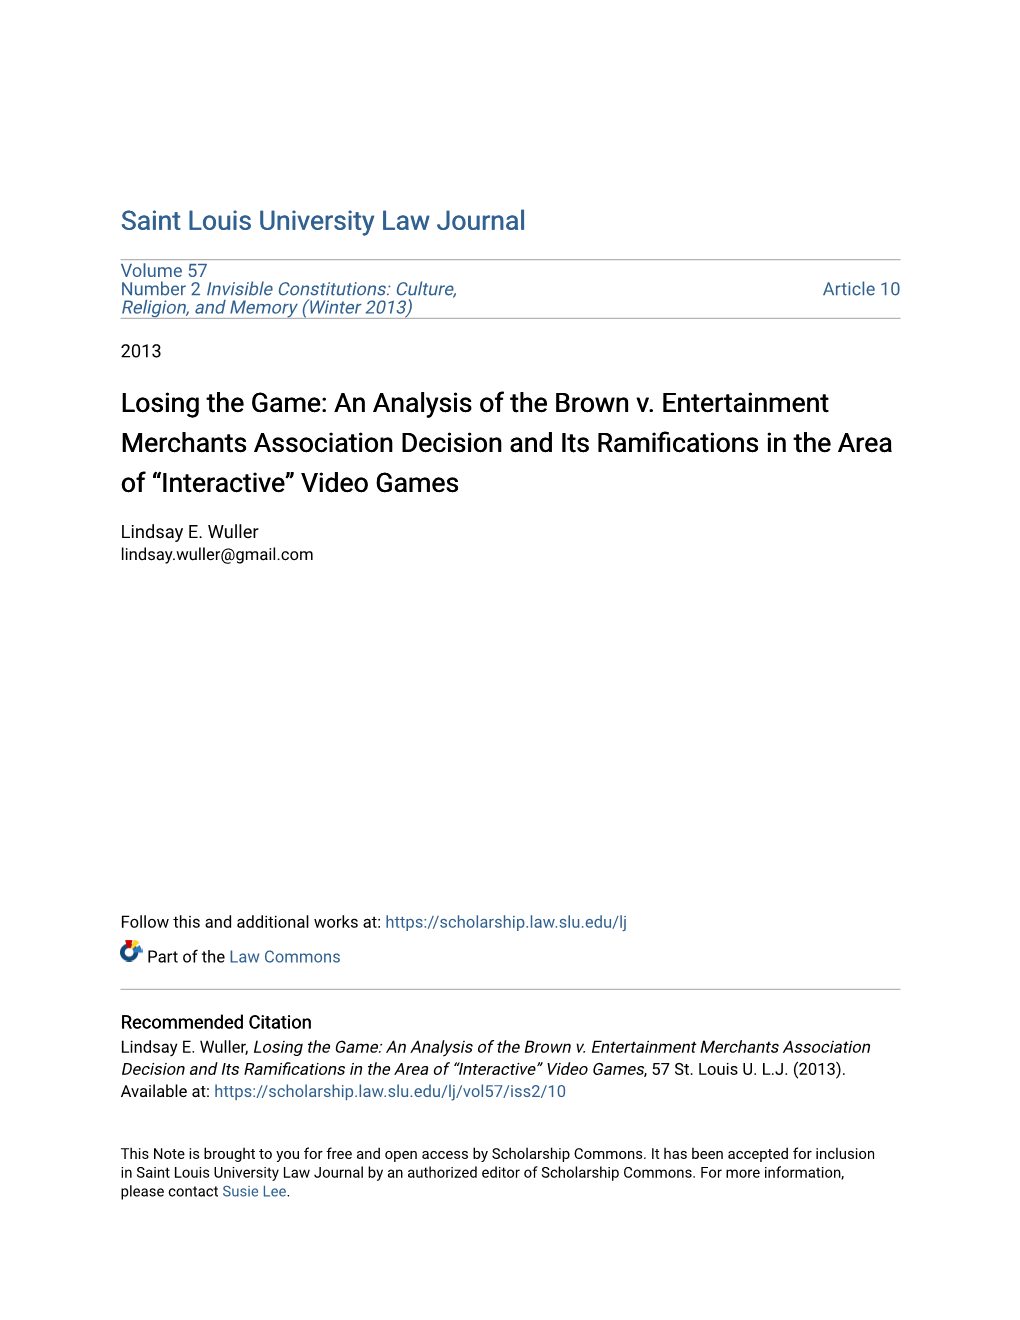 An Analysis of the Brown V. Entertainment Merchants Association Decision and Its Ramifications in the Area of “Interactive” Video Games